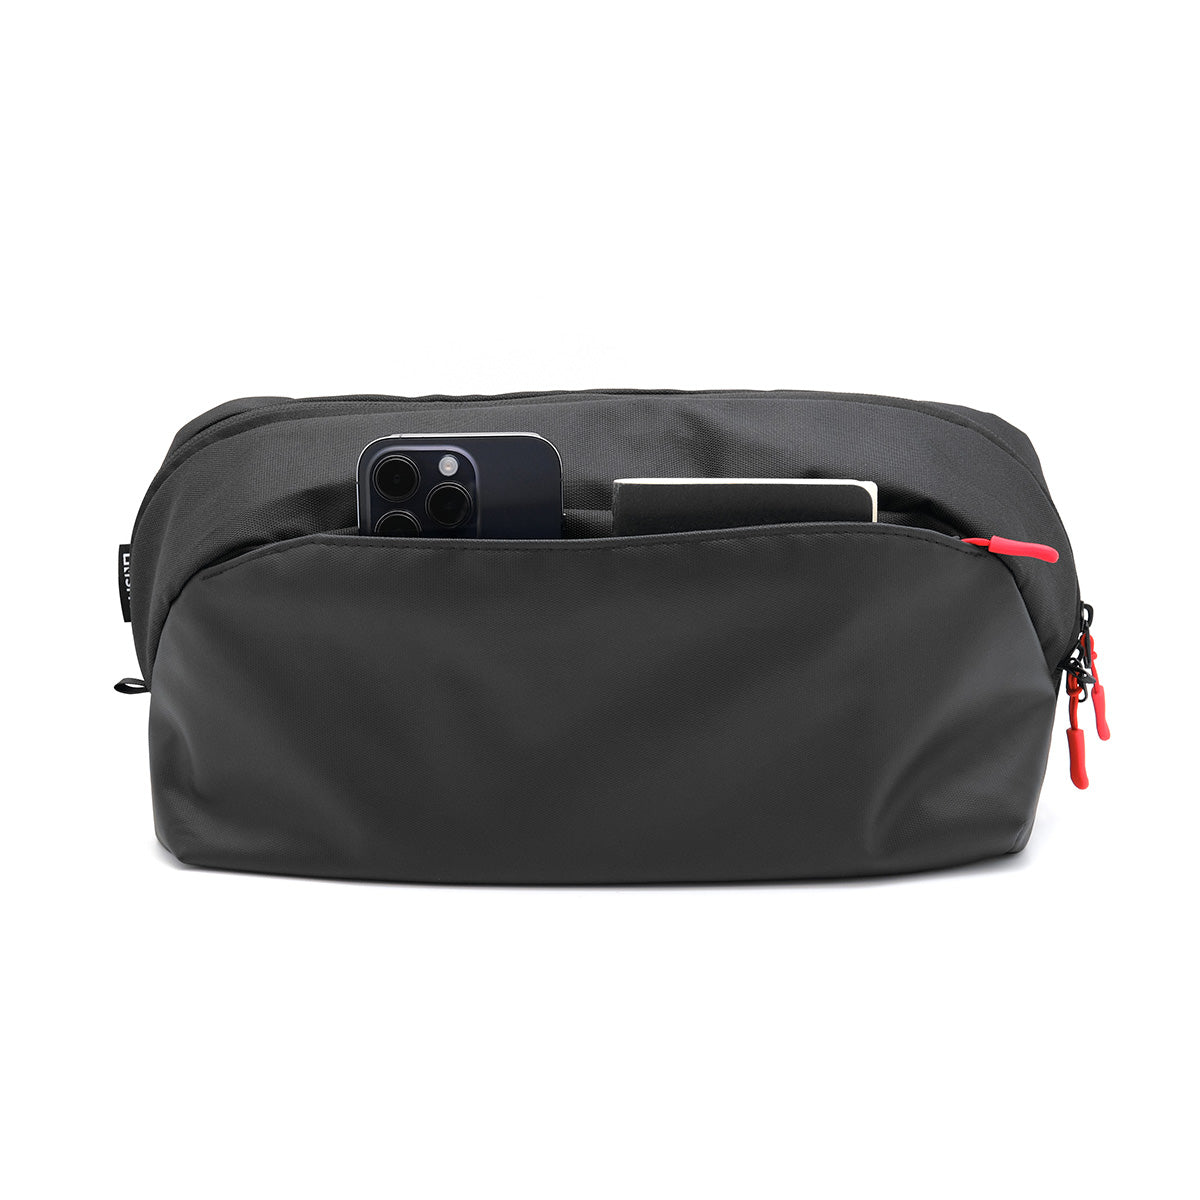 NSMO Gamer Sling Carrying Bag for Nintendo Switch, Steam Deck, ASUS ROG Ally and Handheld Console